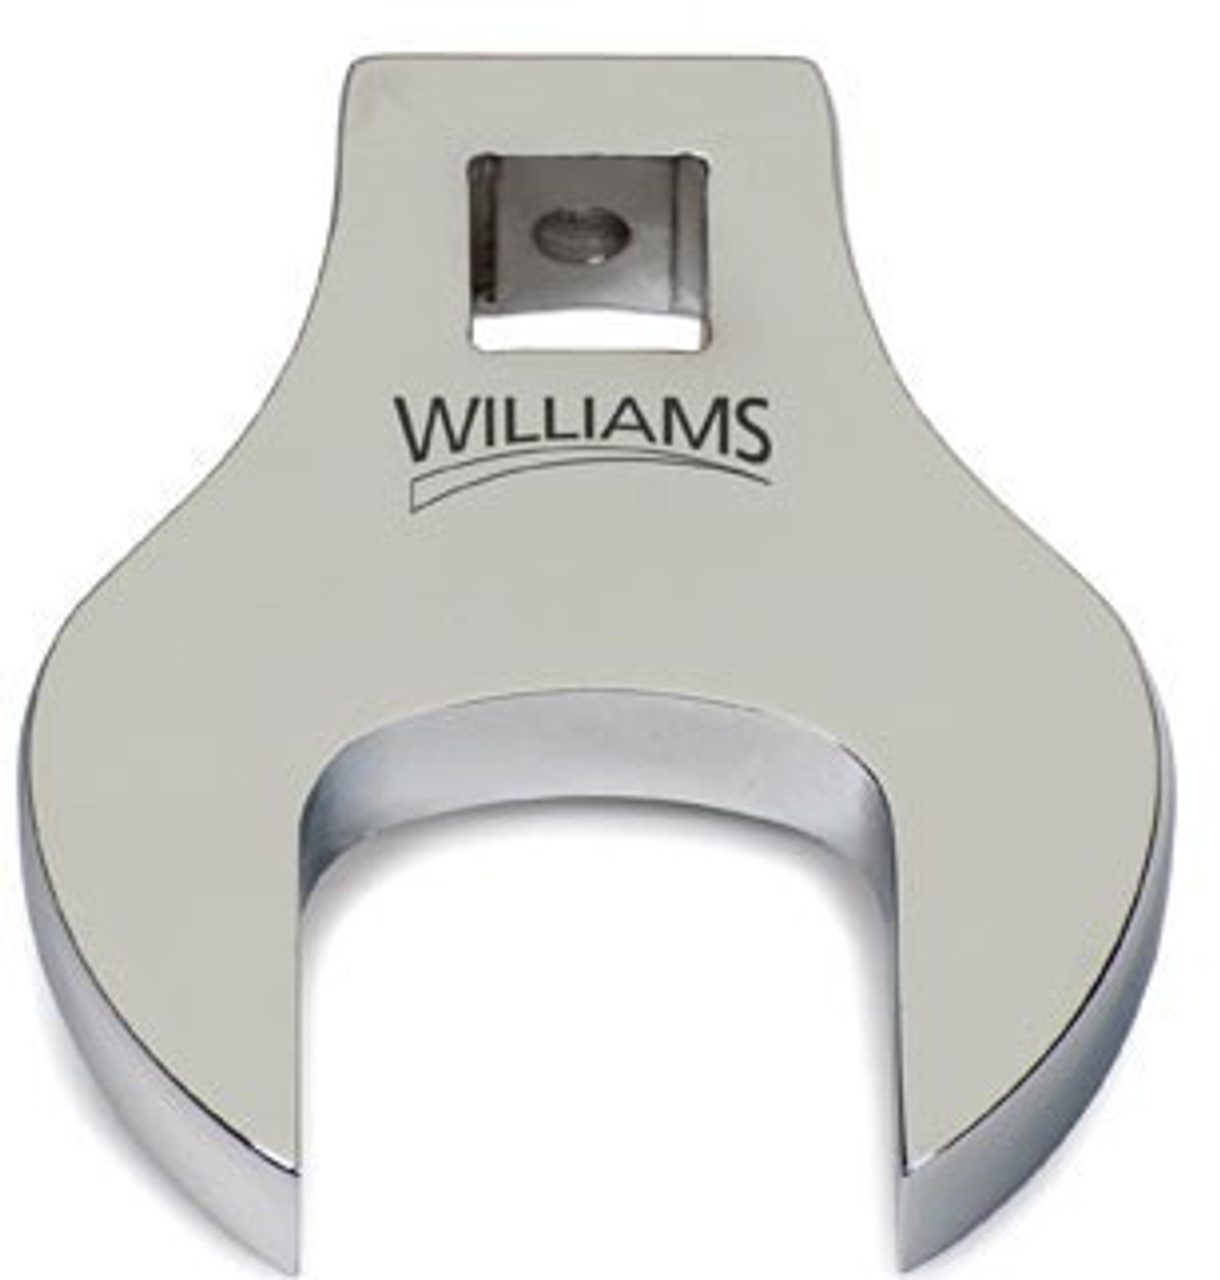 Williams 1 11/16 Williams 3/8 Drive Crowfoot Wrench - 10721